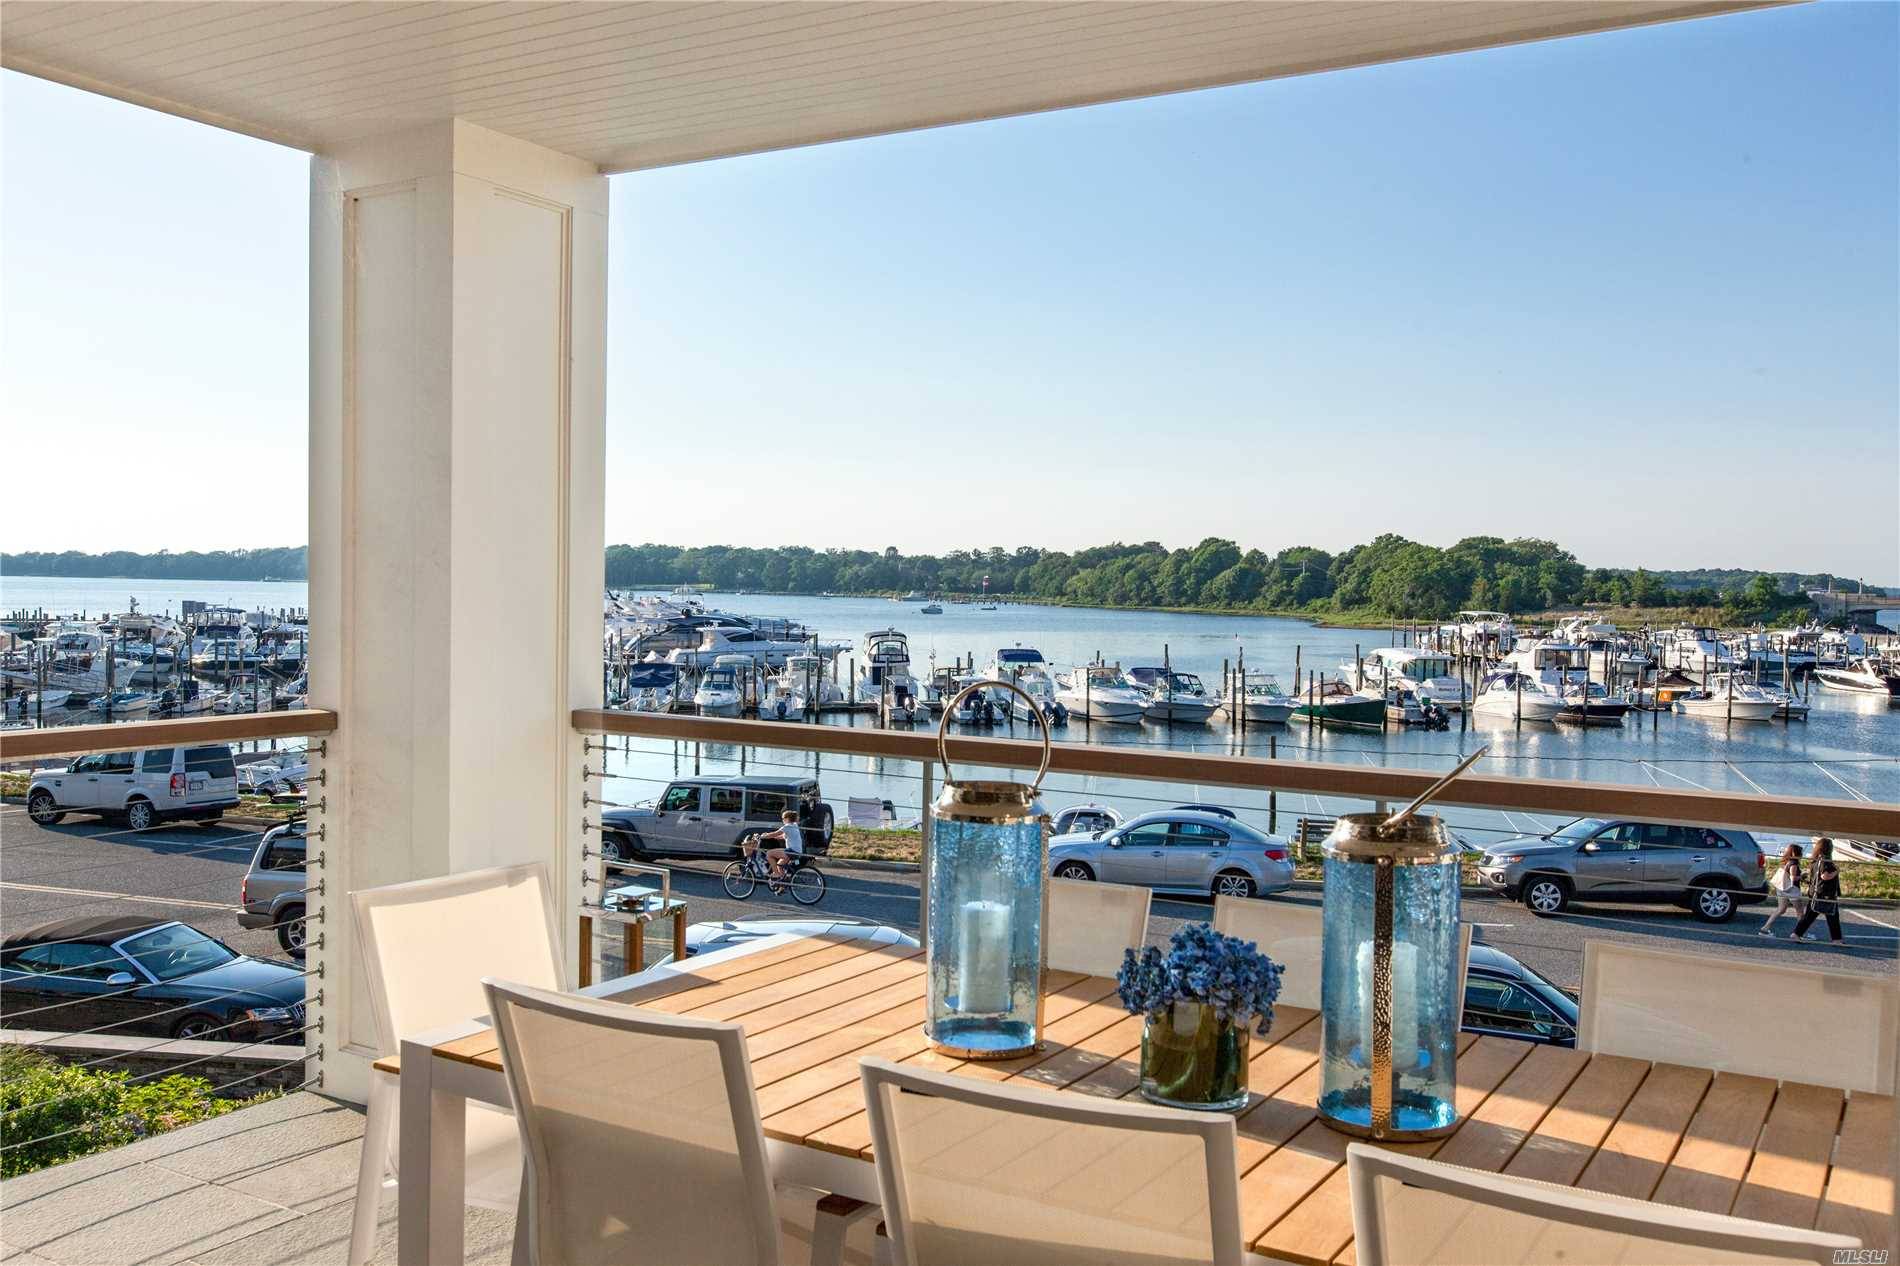 This Sag Harbor Village Residence Boast 2, 281 Square Feet And Encompasses All The Luxuries And Relaxed Lifestyle That Condominium Living Affords.